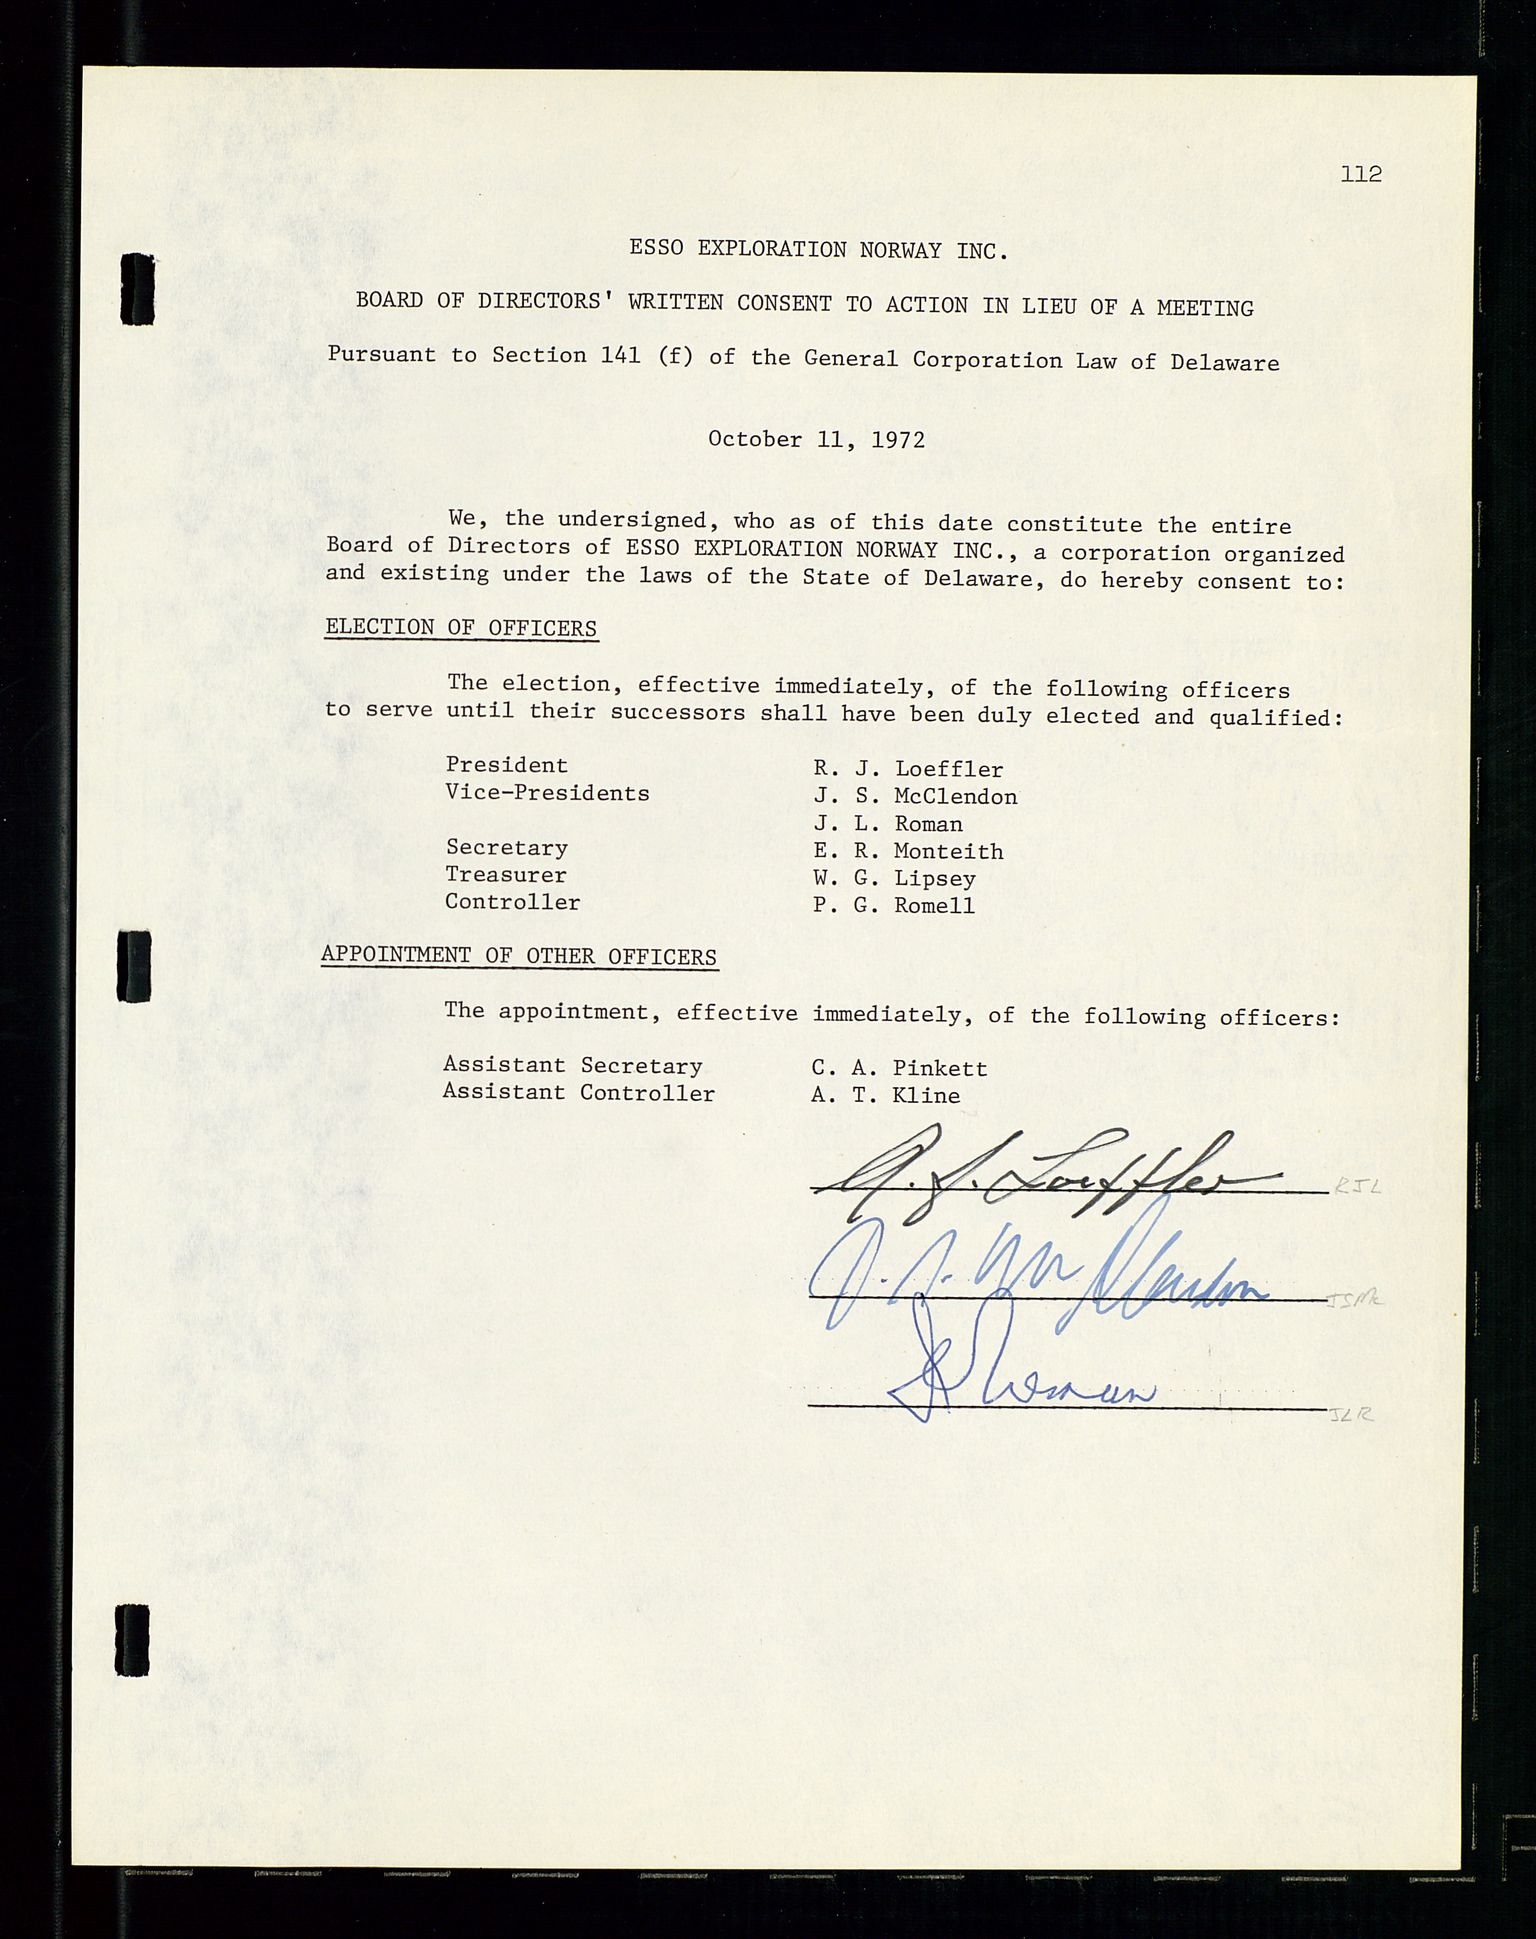 Pa 1512 - Esso Exploration and Production Norway Inc., SAST/A-101917/A/Aa/L0001/0001: Styredokumenter / Corporate records, By-Laws, Board meeting minutes, Incorporations, 1965-1975, s. 112